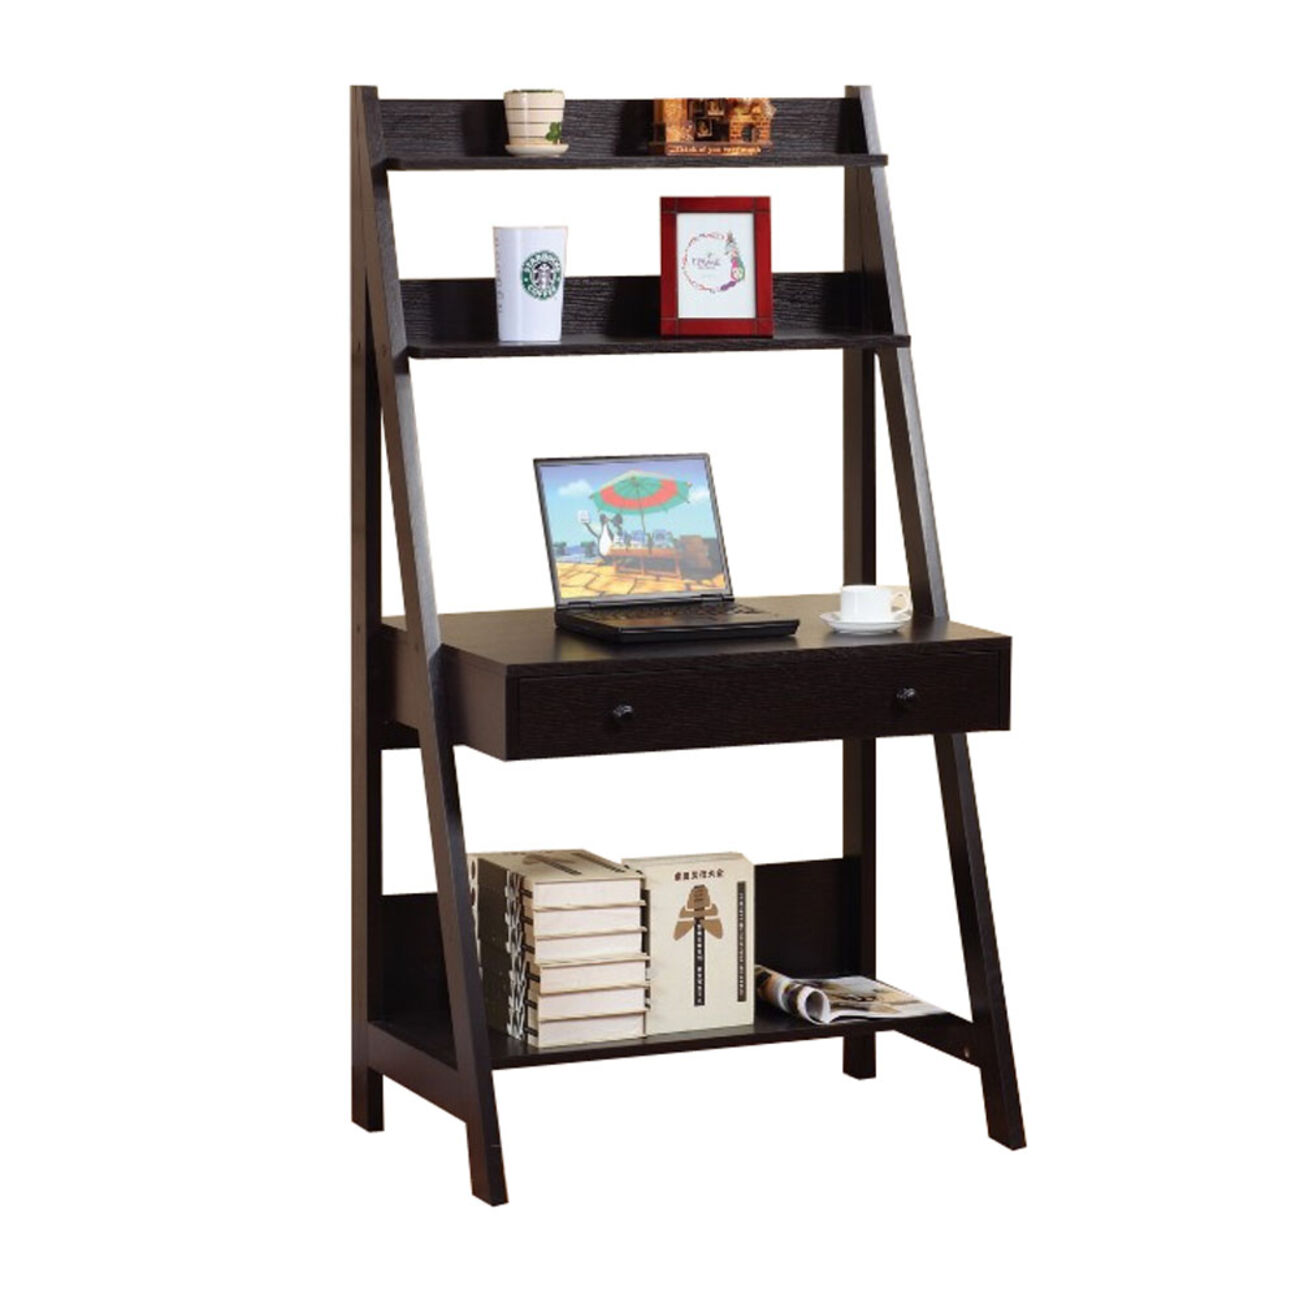 Contemporary Style Ladder Desk With 3 Open Shelves.